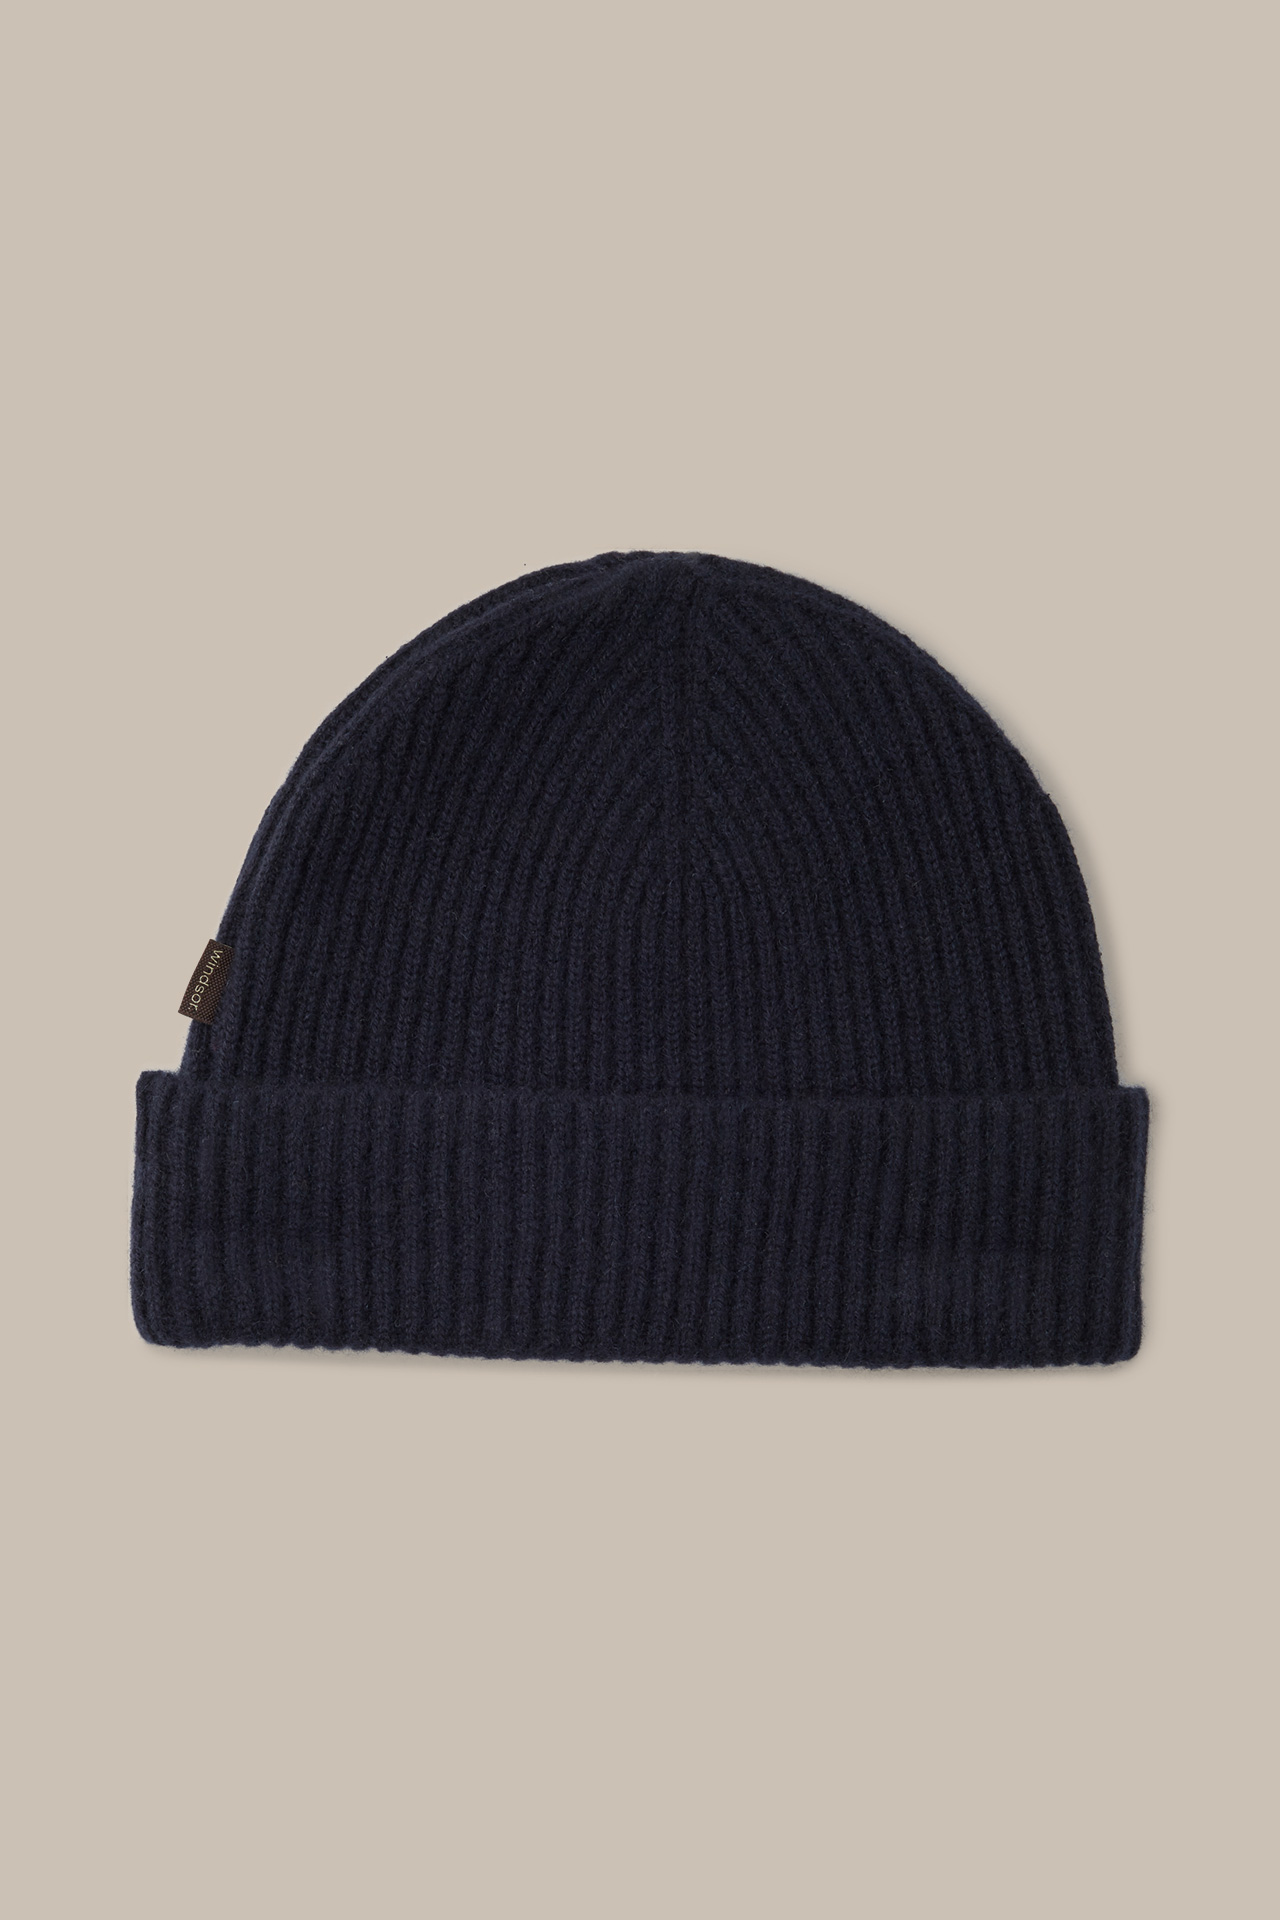 Can Cashmere Hat in Navy